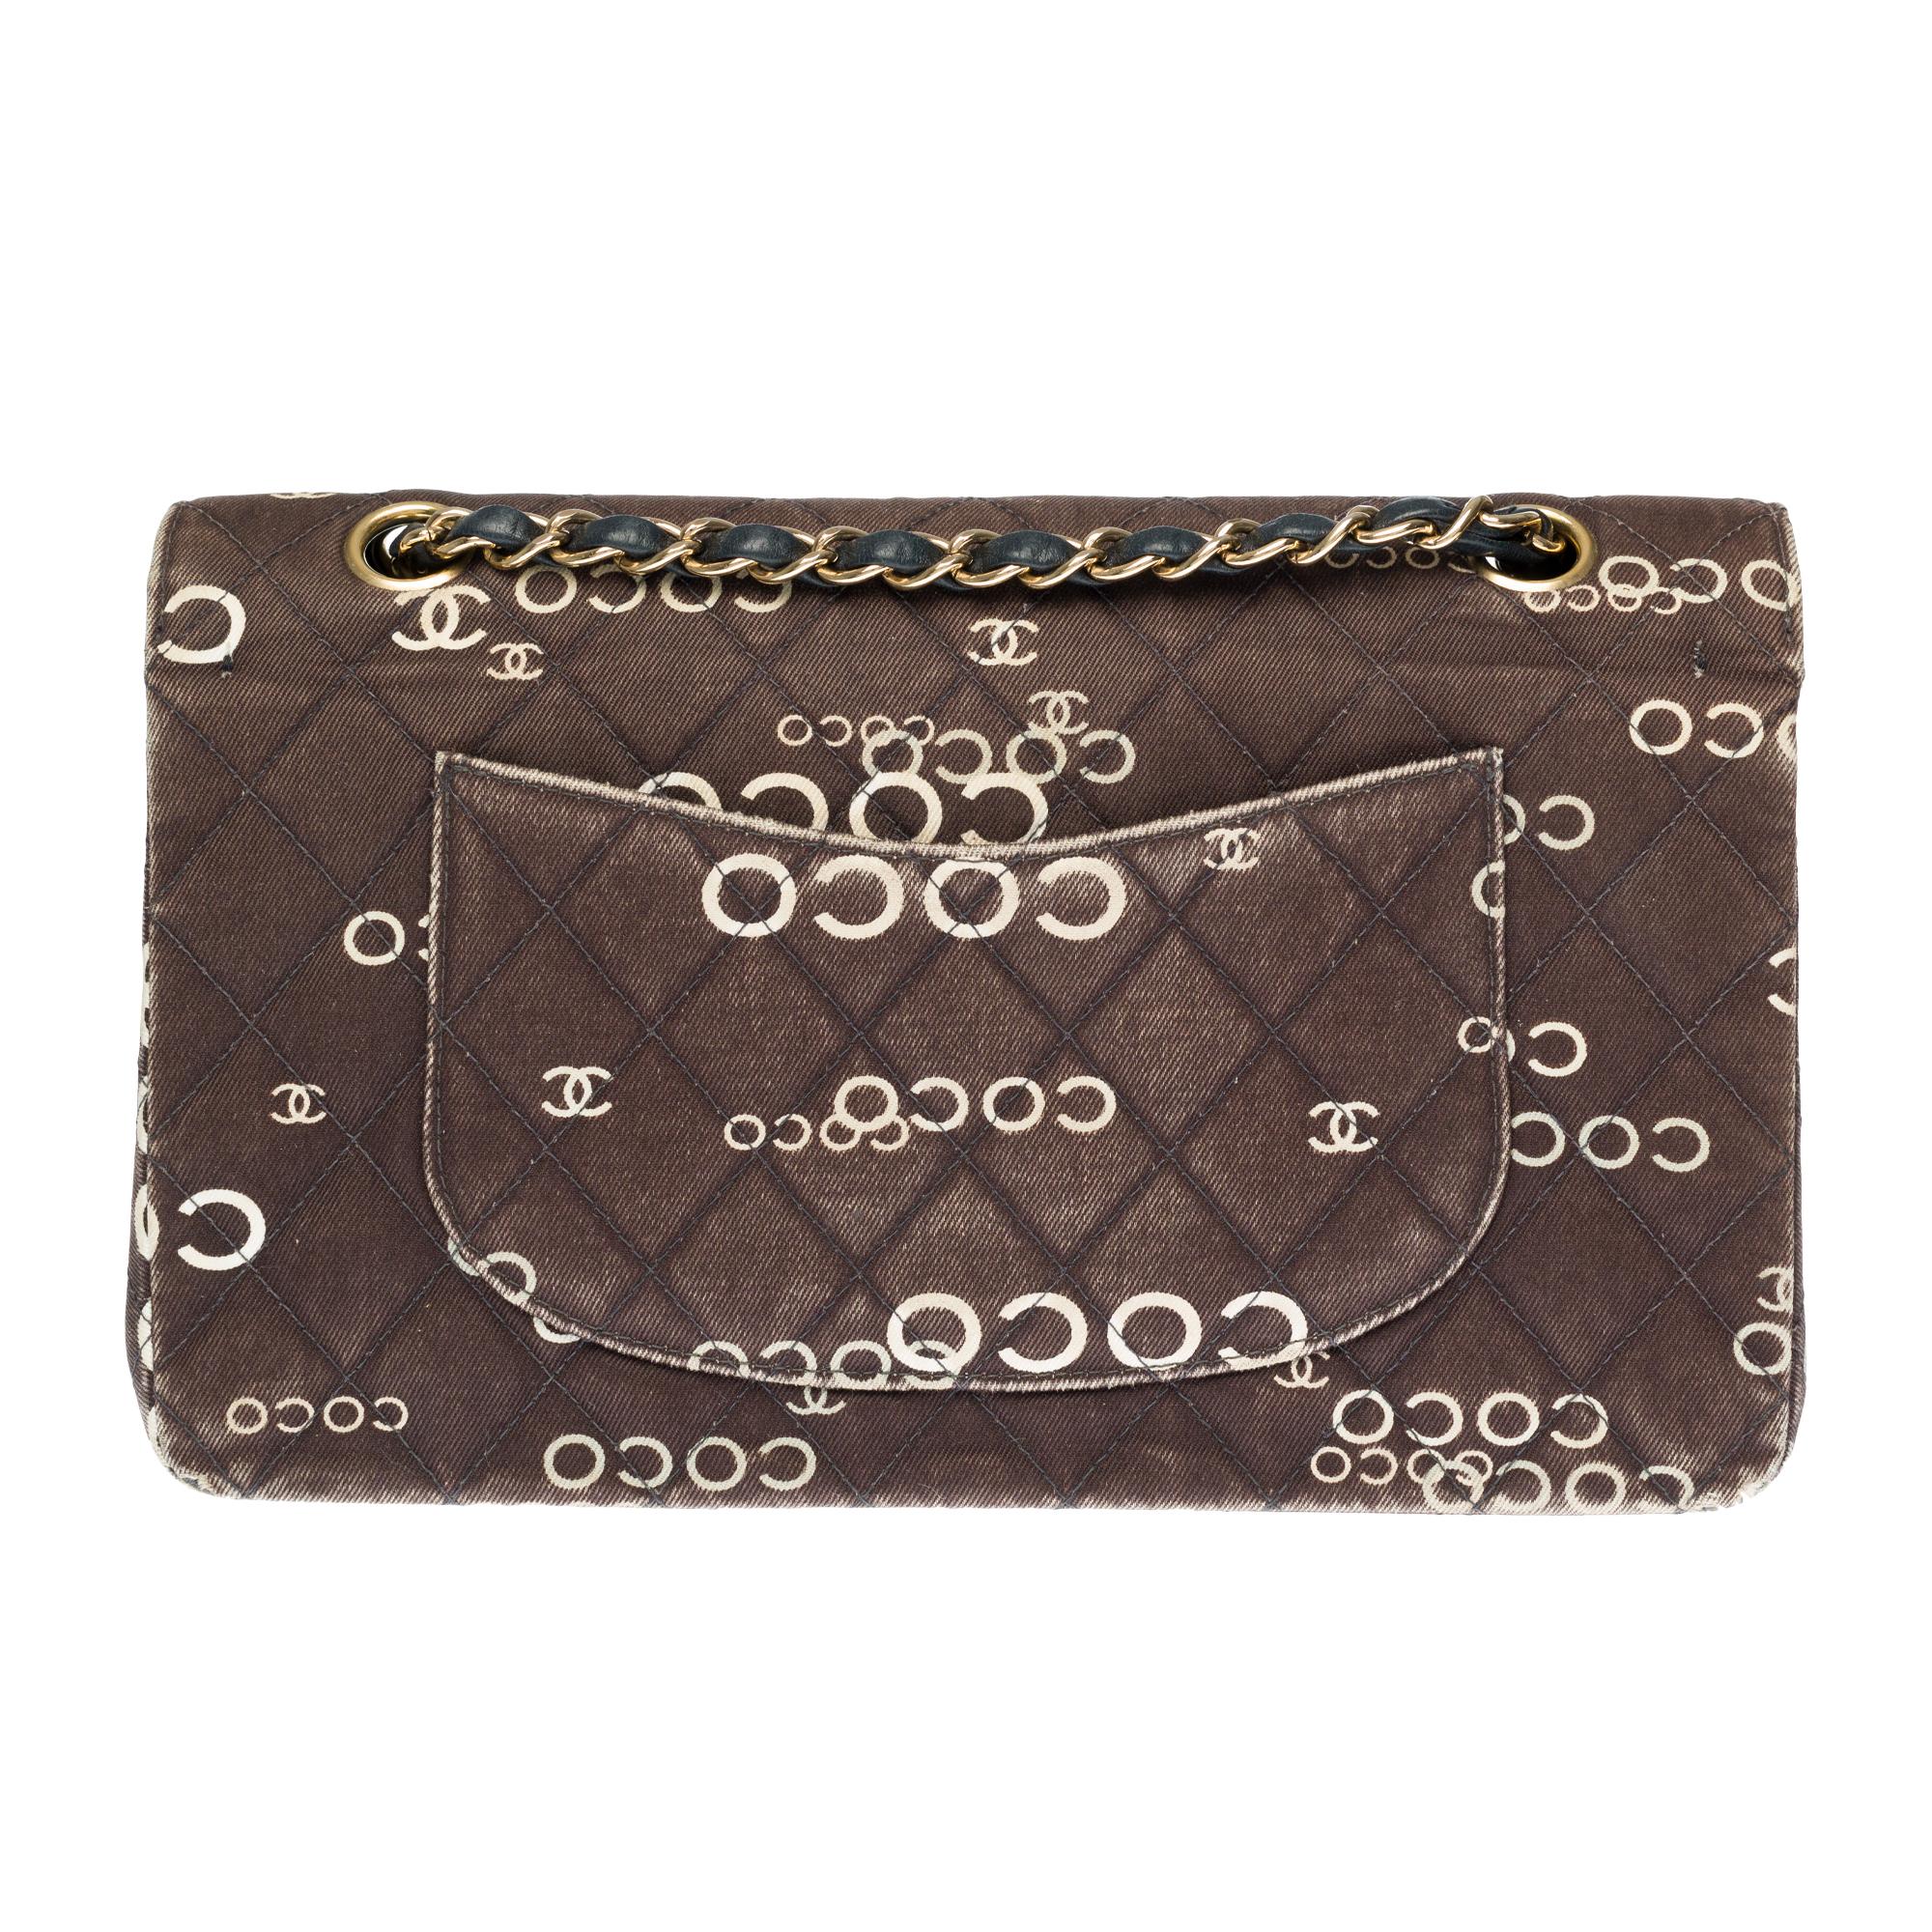 Collector’s Coin/ Limited Edition Coco Chanel

Beautiful Chanel Timeless 2.55 handbag with double flap in brown printed quilted canvas, gold metal hardware, a gold metal chain handle intertwined with black leather allowing a hand or shoulder or